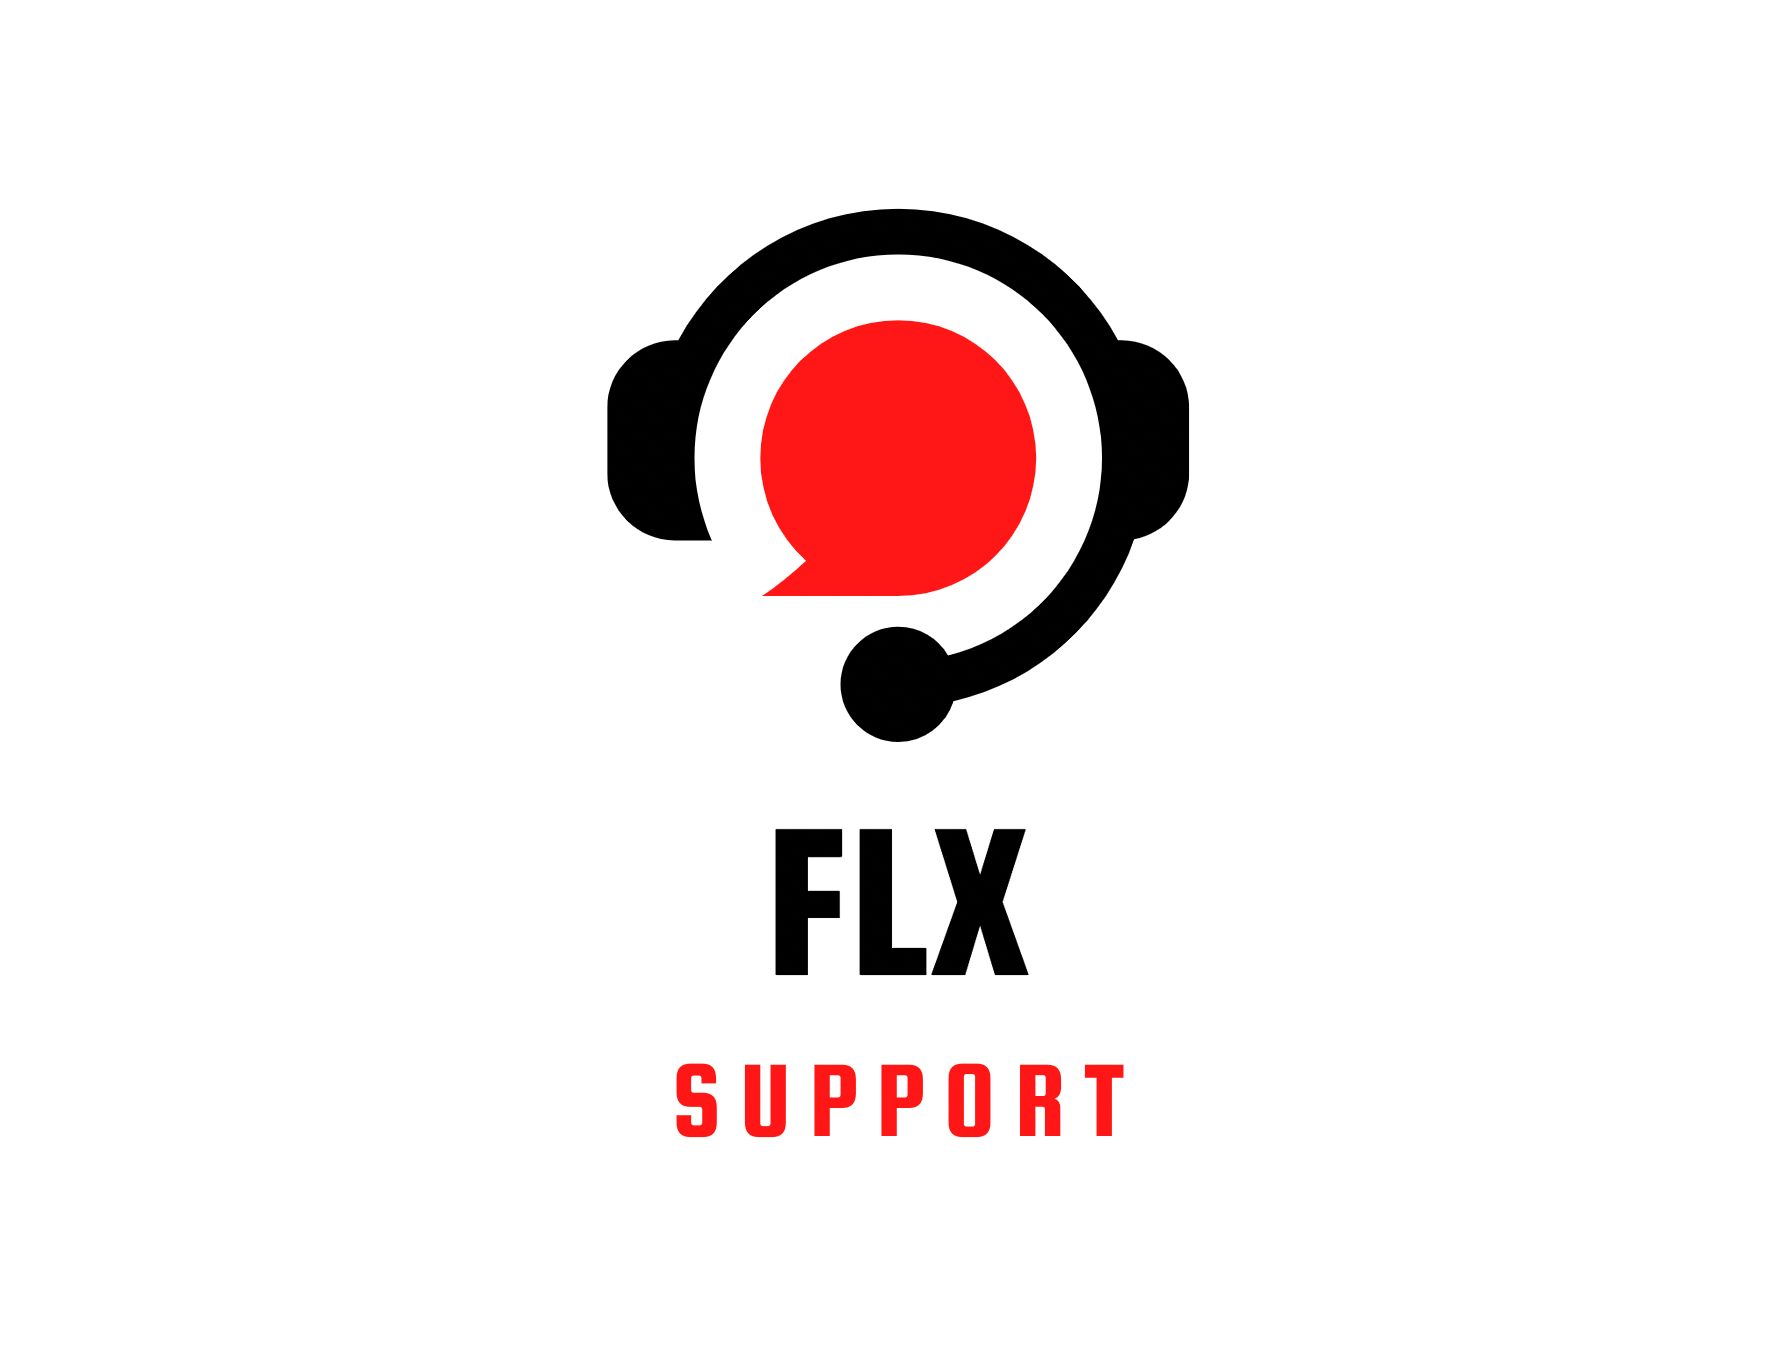 FLX Support